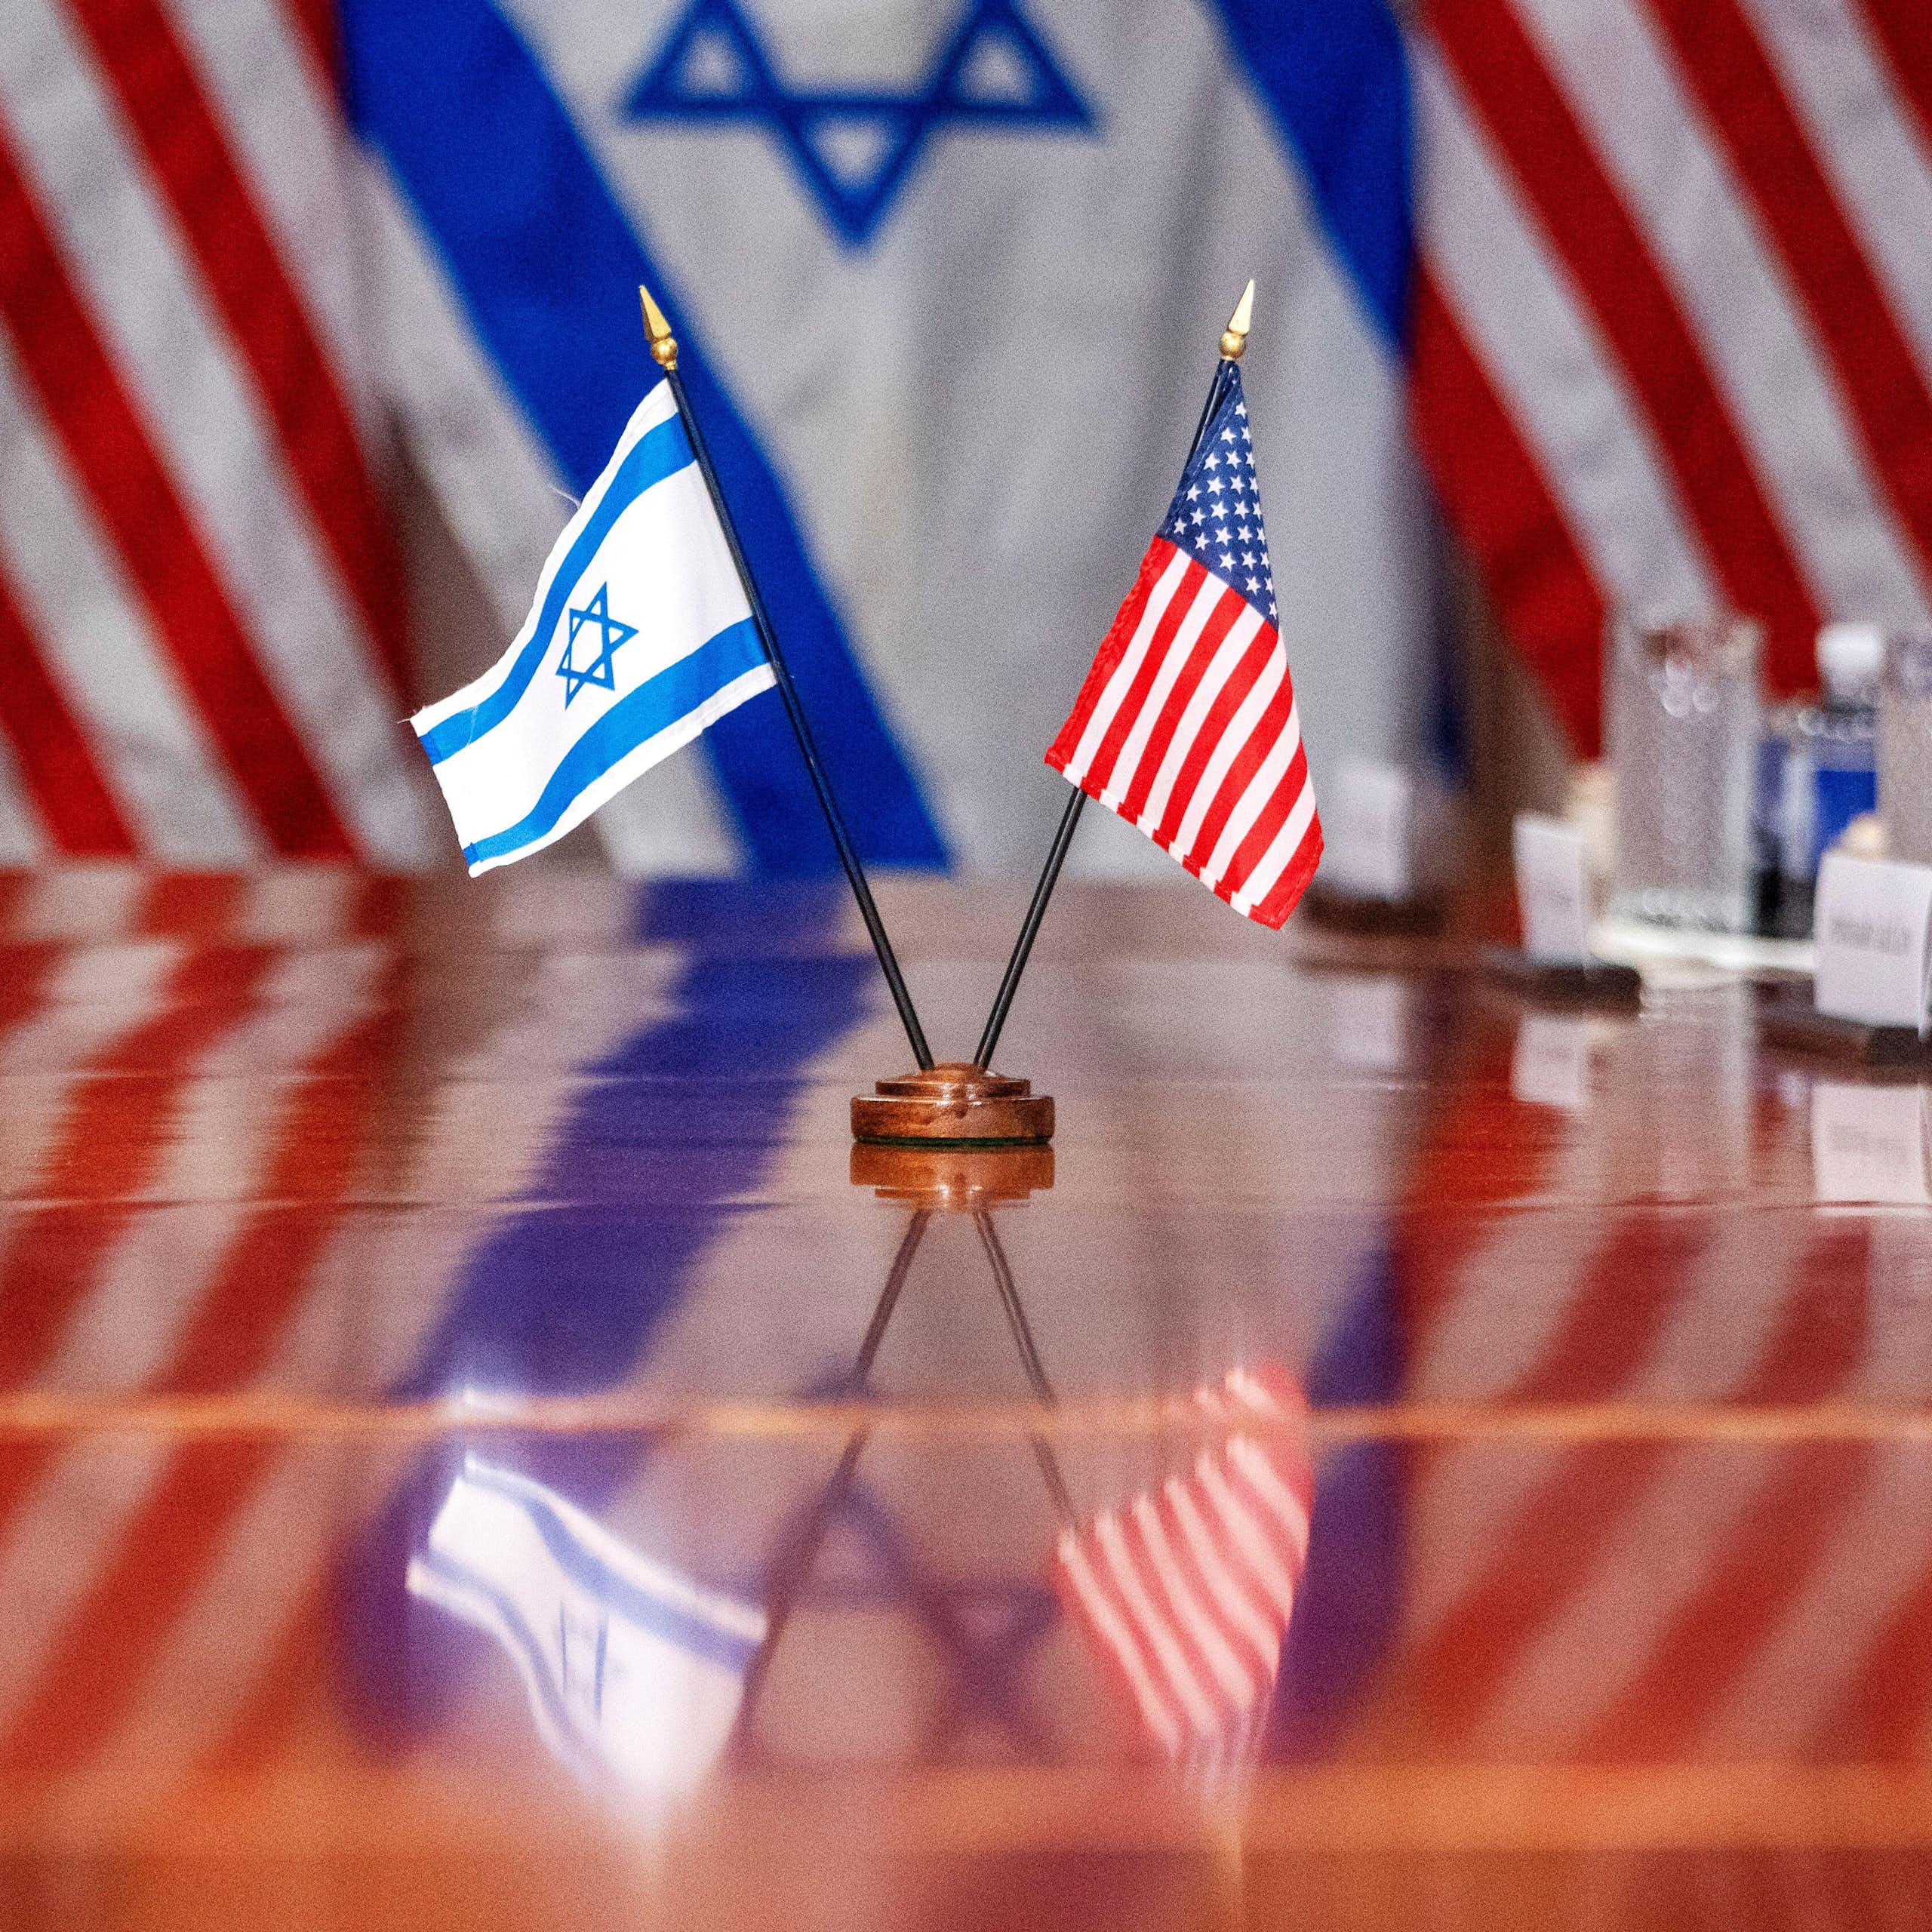 Israeli and US flags together on a polished boardroom table.